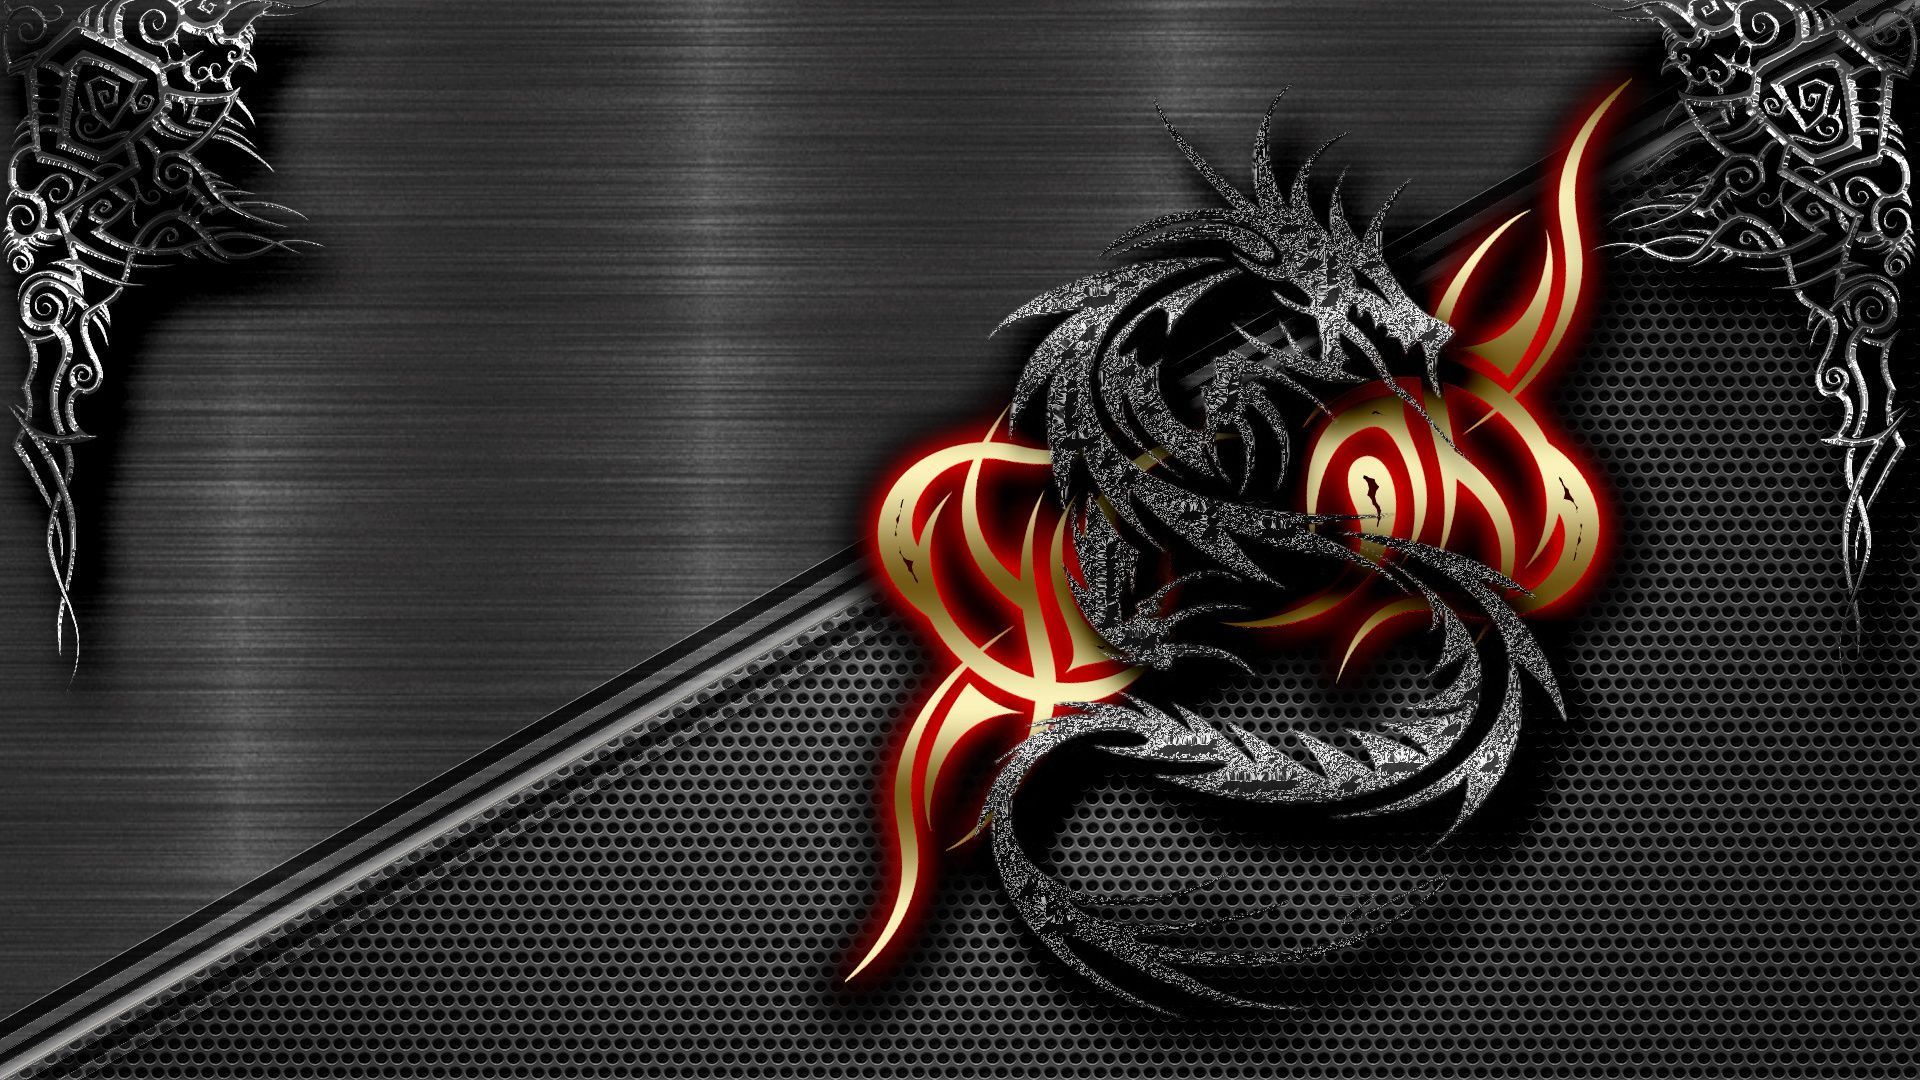 dragon paint on black background | wallpapers55.com - Best ...